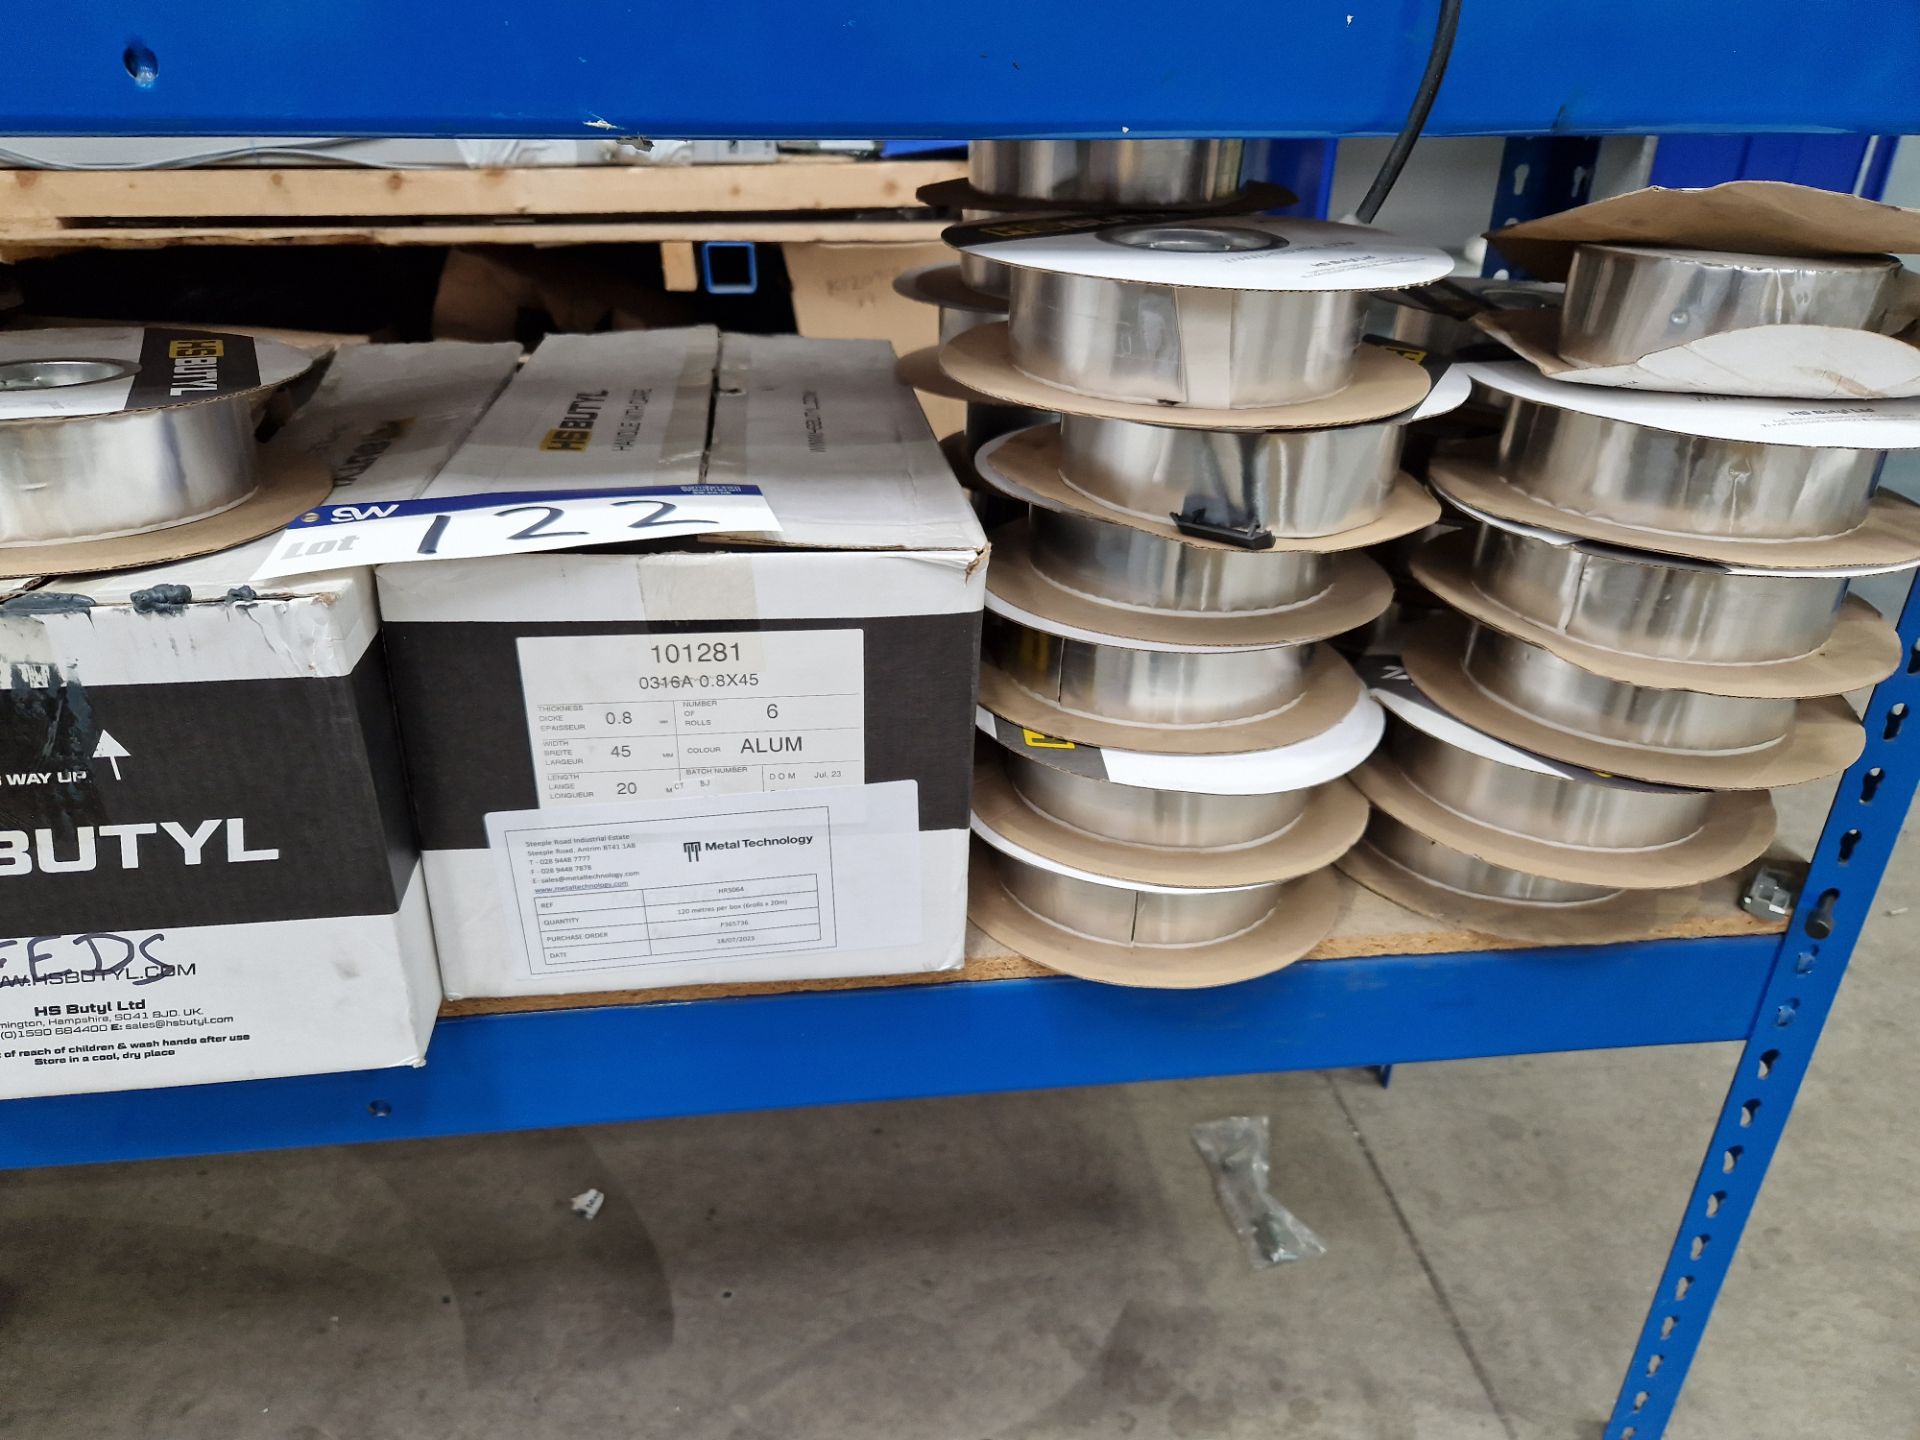 Quantity of HS Butyl Silver Tape, as set out on one shelf of racking Please read the following - Image 2 of 3